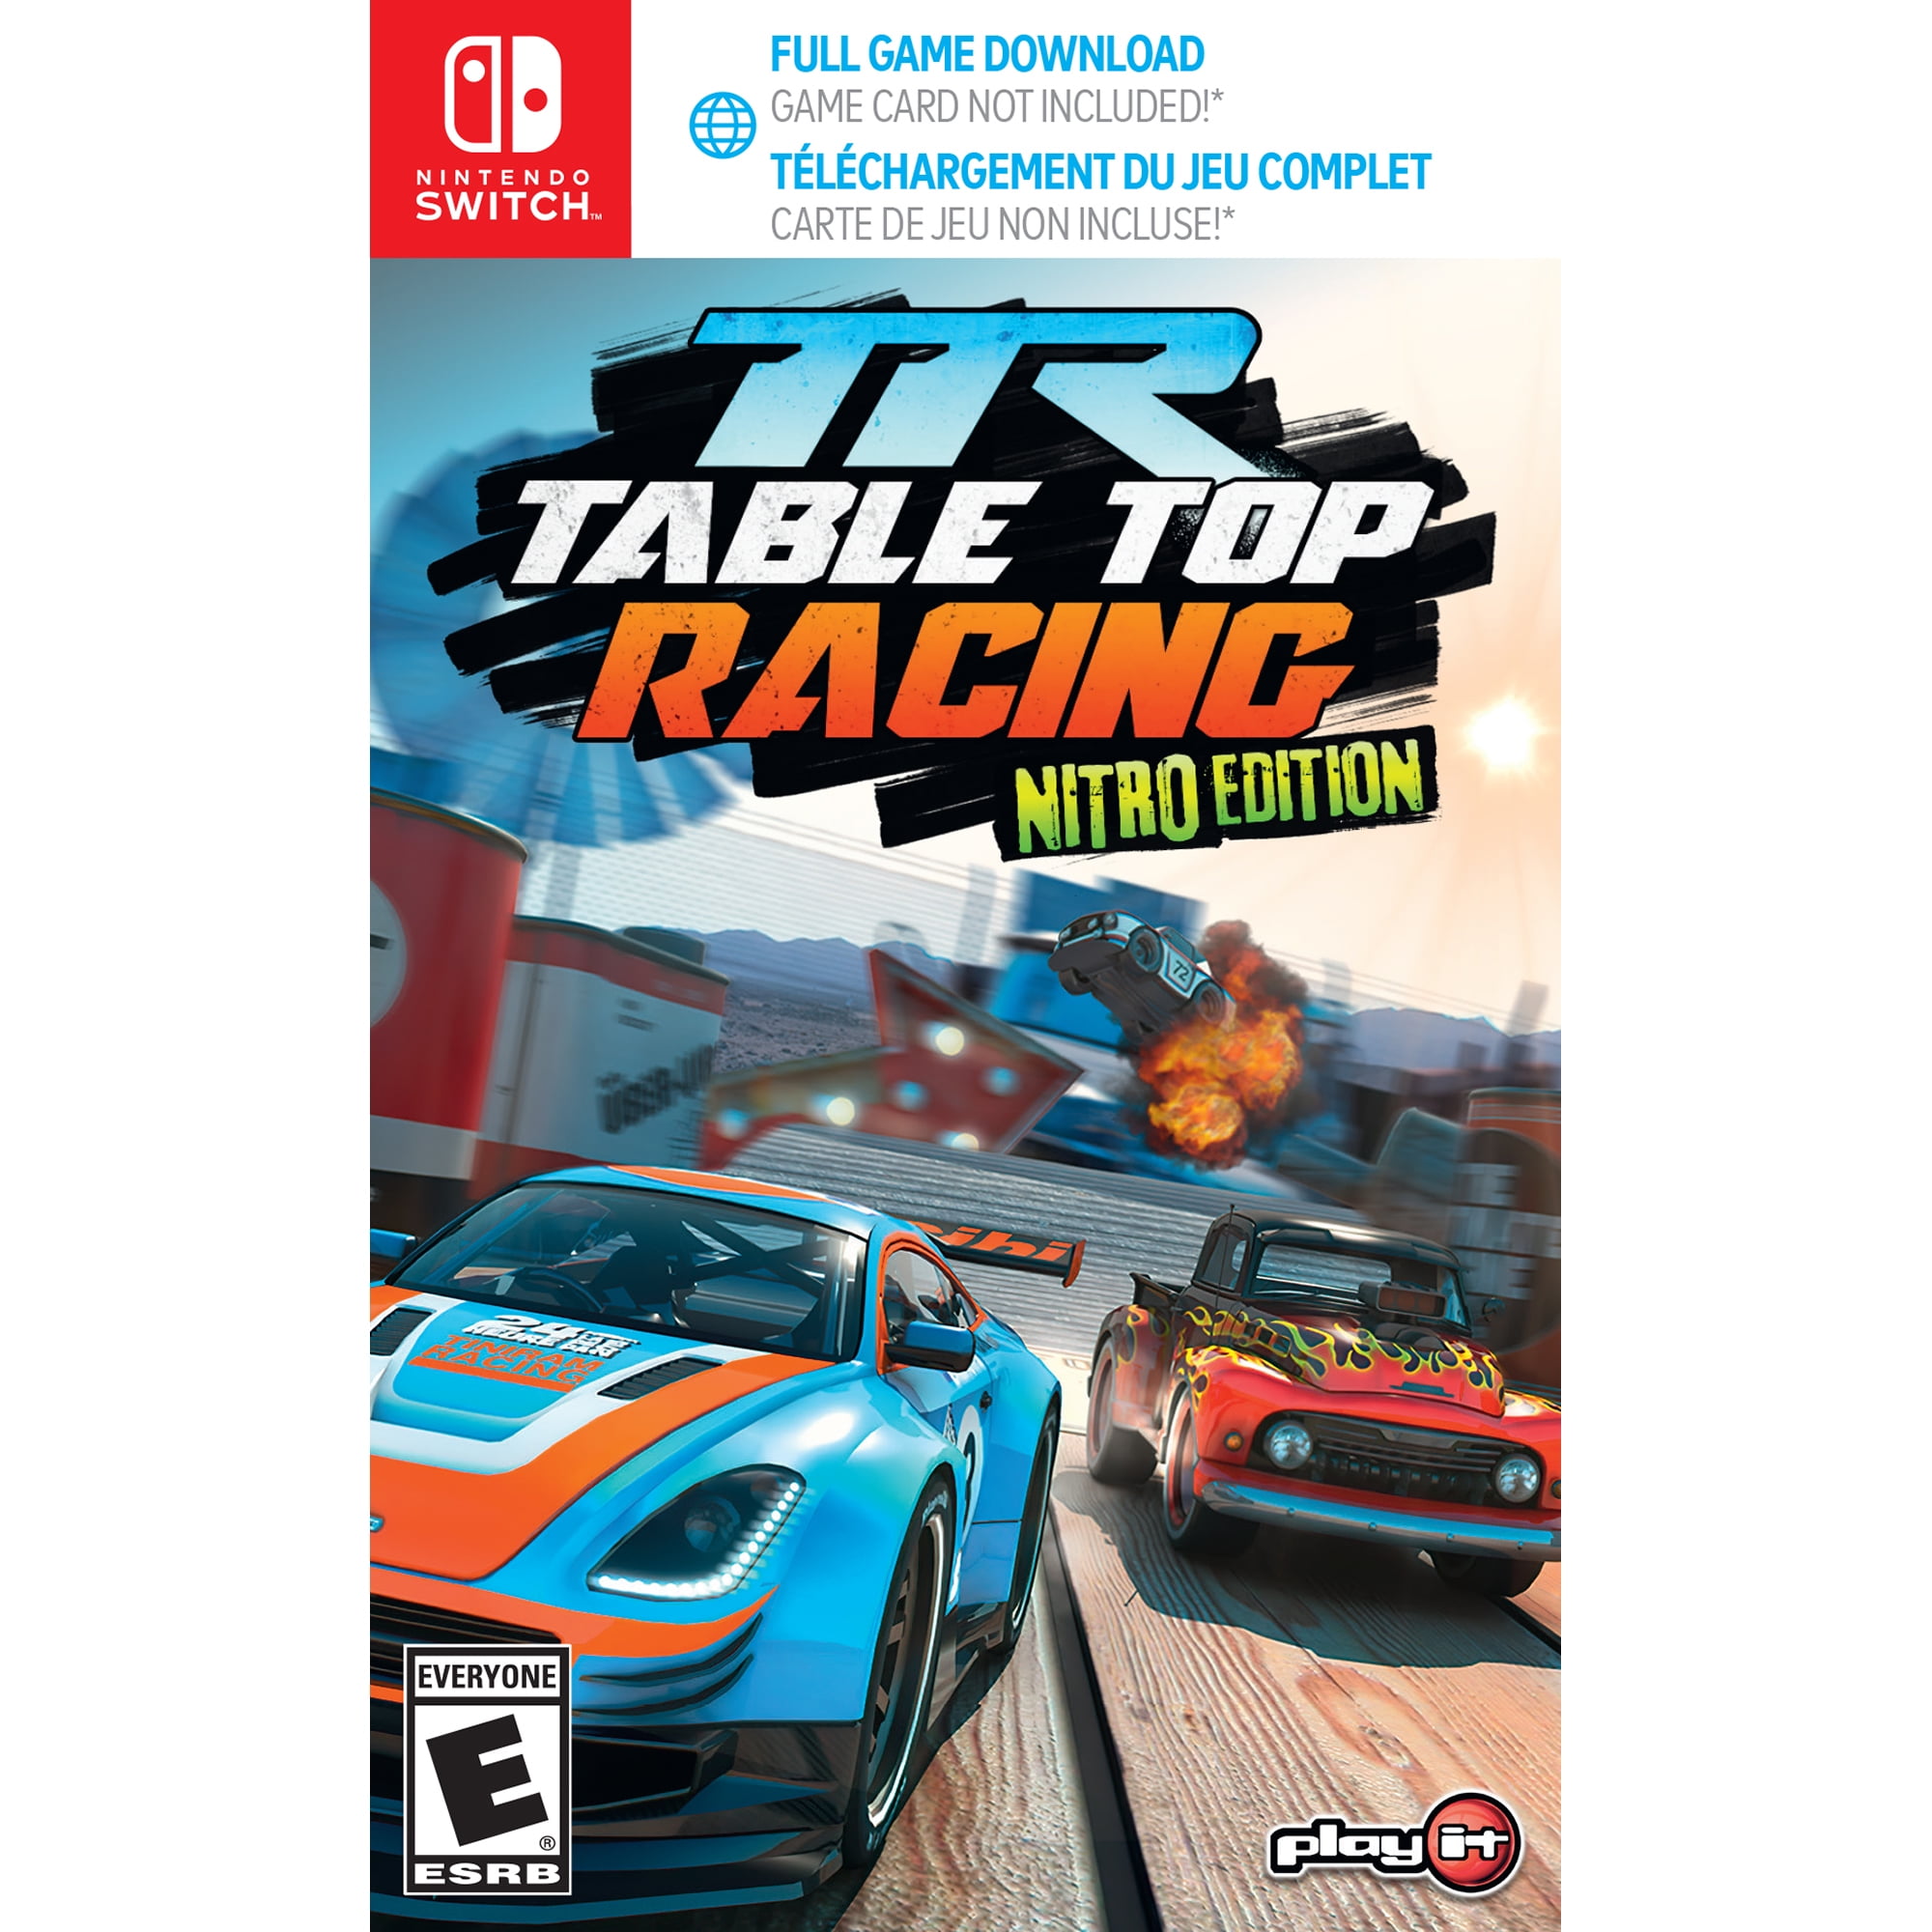 Table Top Racing: Edition, GS2 Games, Switch, [Code in Box], GS00088 - Walmart.com